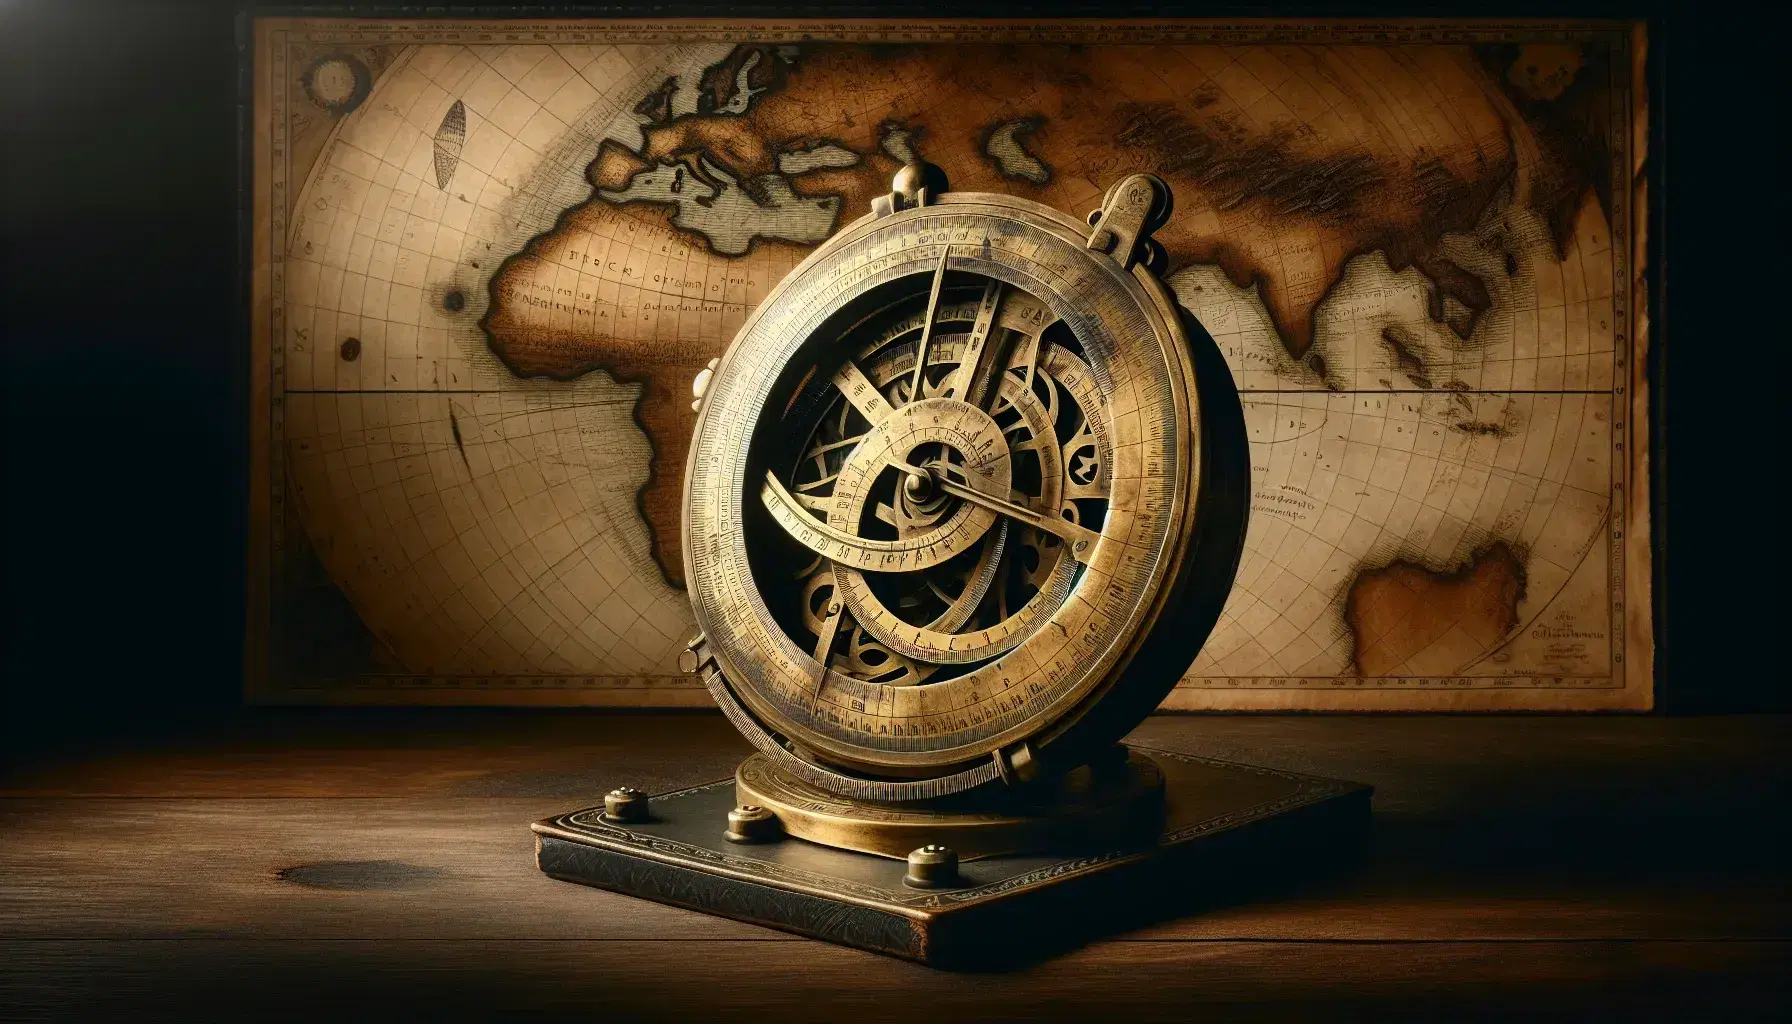 Antique brass nautical astrolabe on a wooden table with a hand-drawn map of the Iberian Peninsula and northwestern Africa in the background.